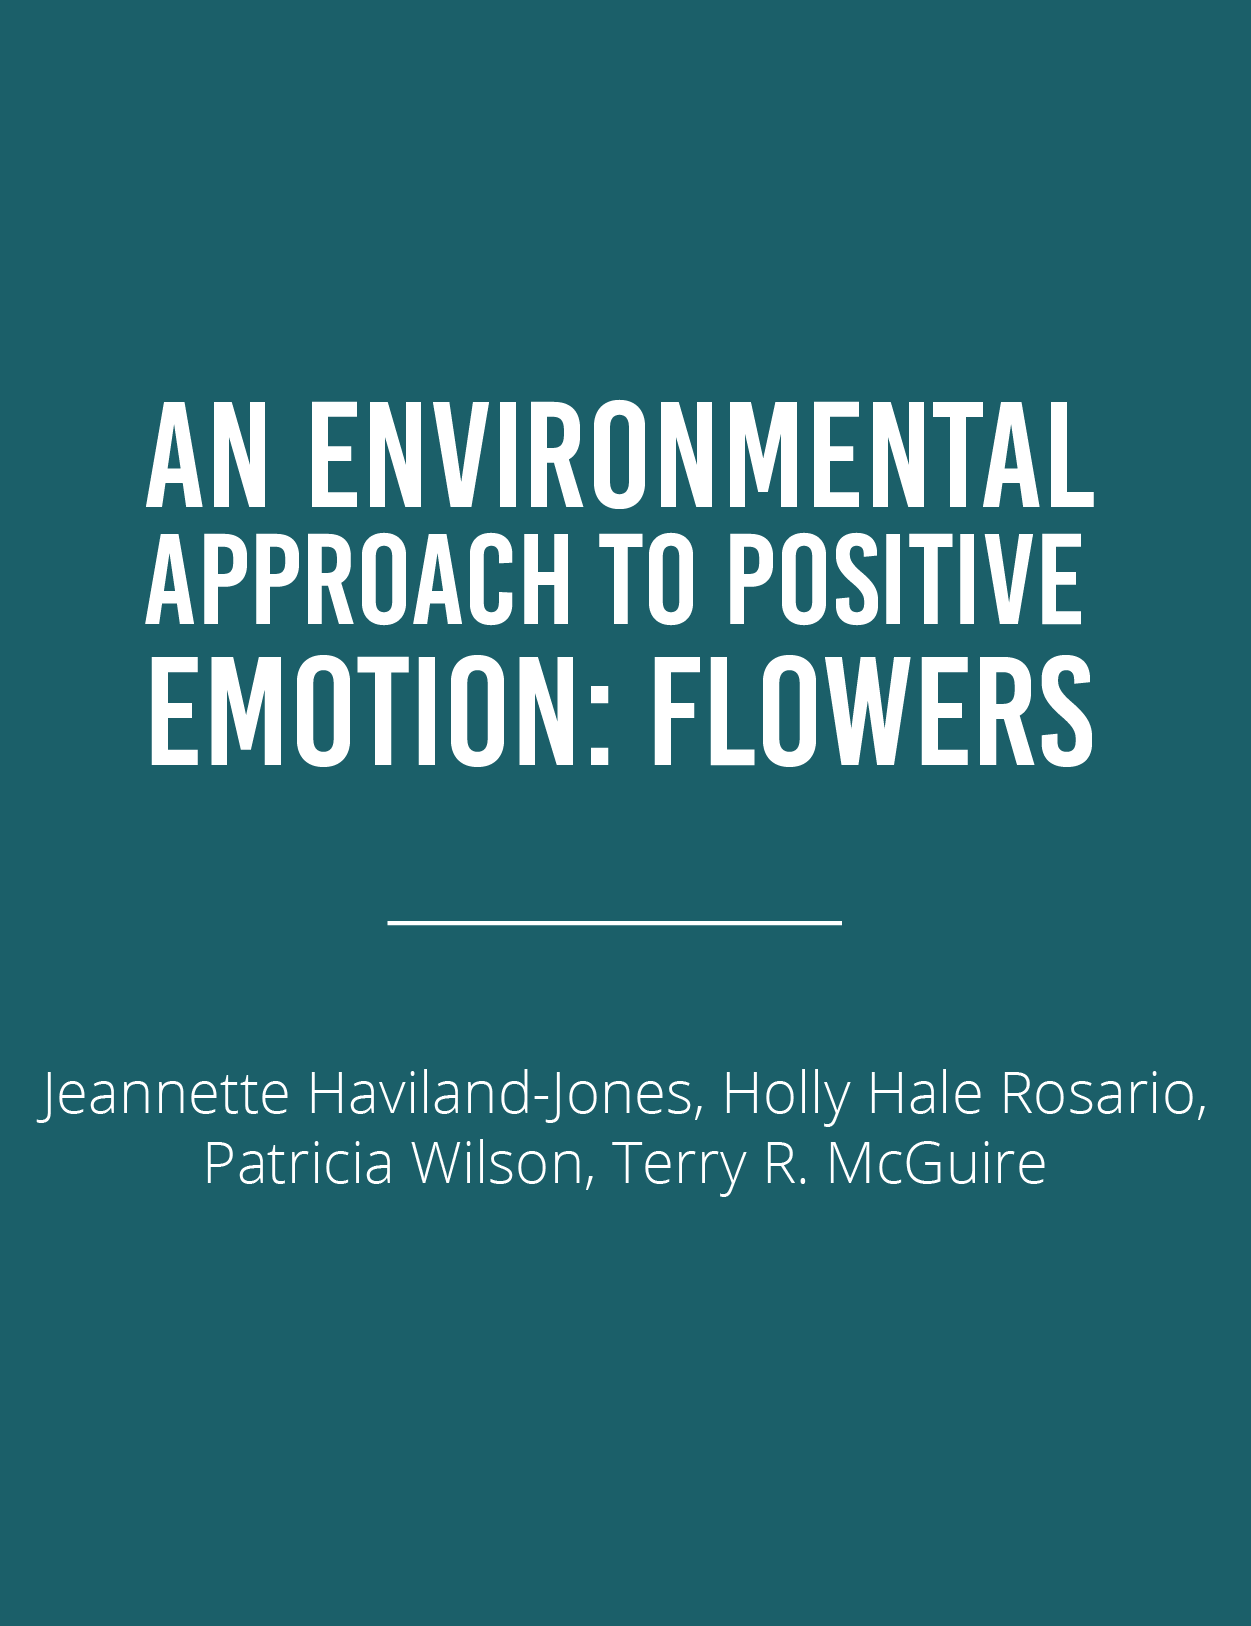 An Environmental Approach to Positive EmotionFeatured Image